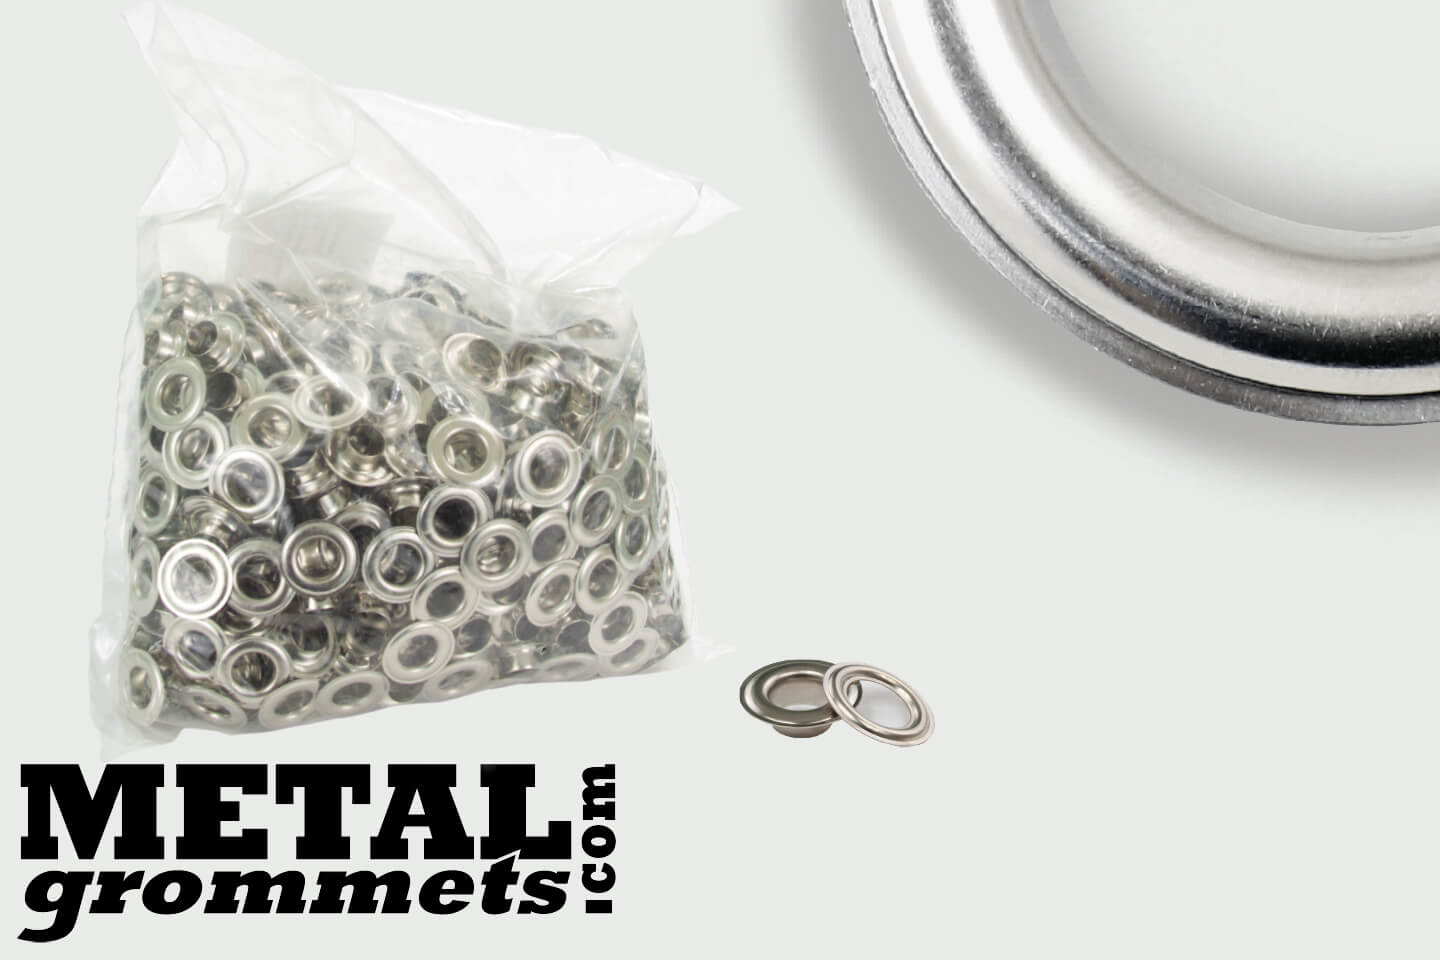 #1 (5/16 - 0.3125 Hole Size) Nickel Plated Grommets & Washers